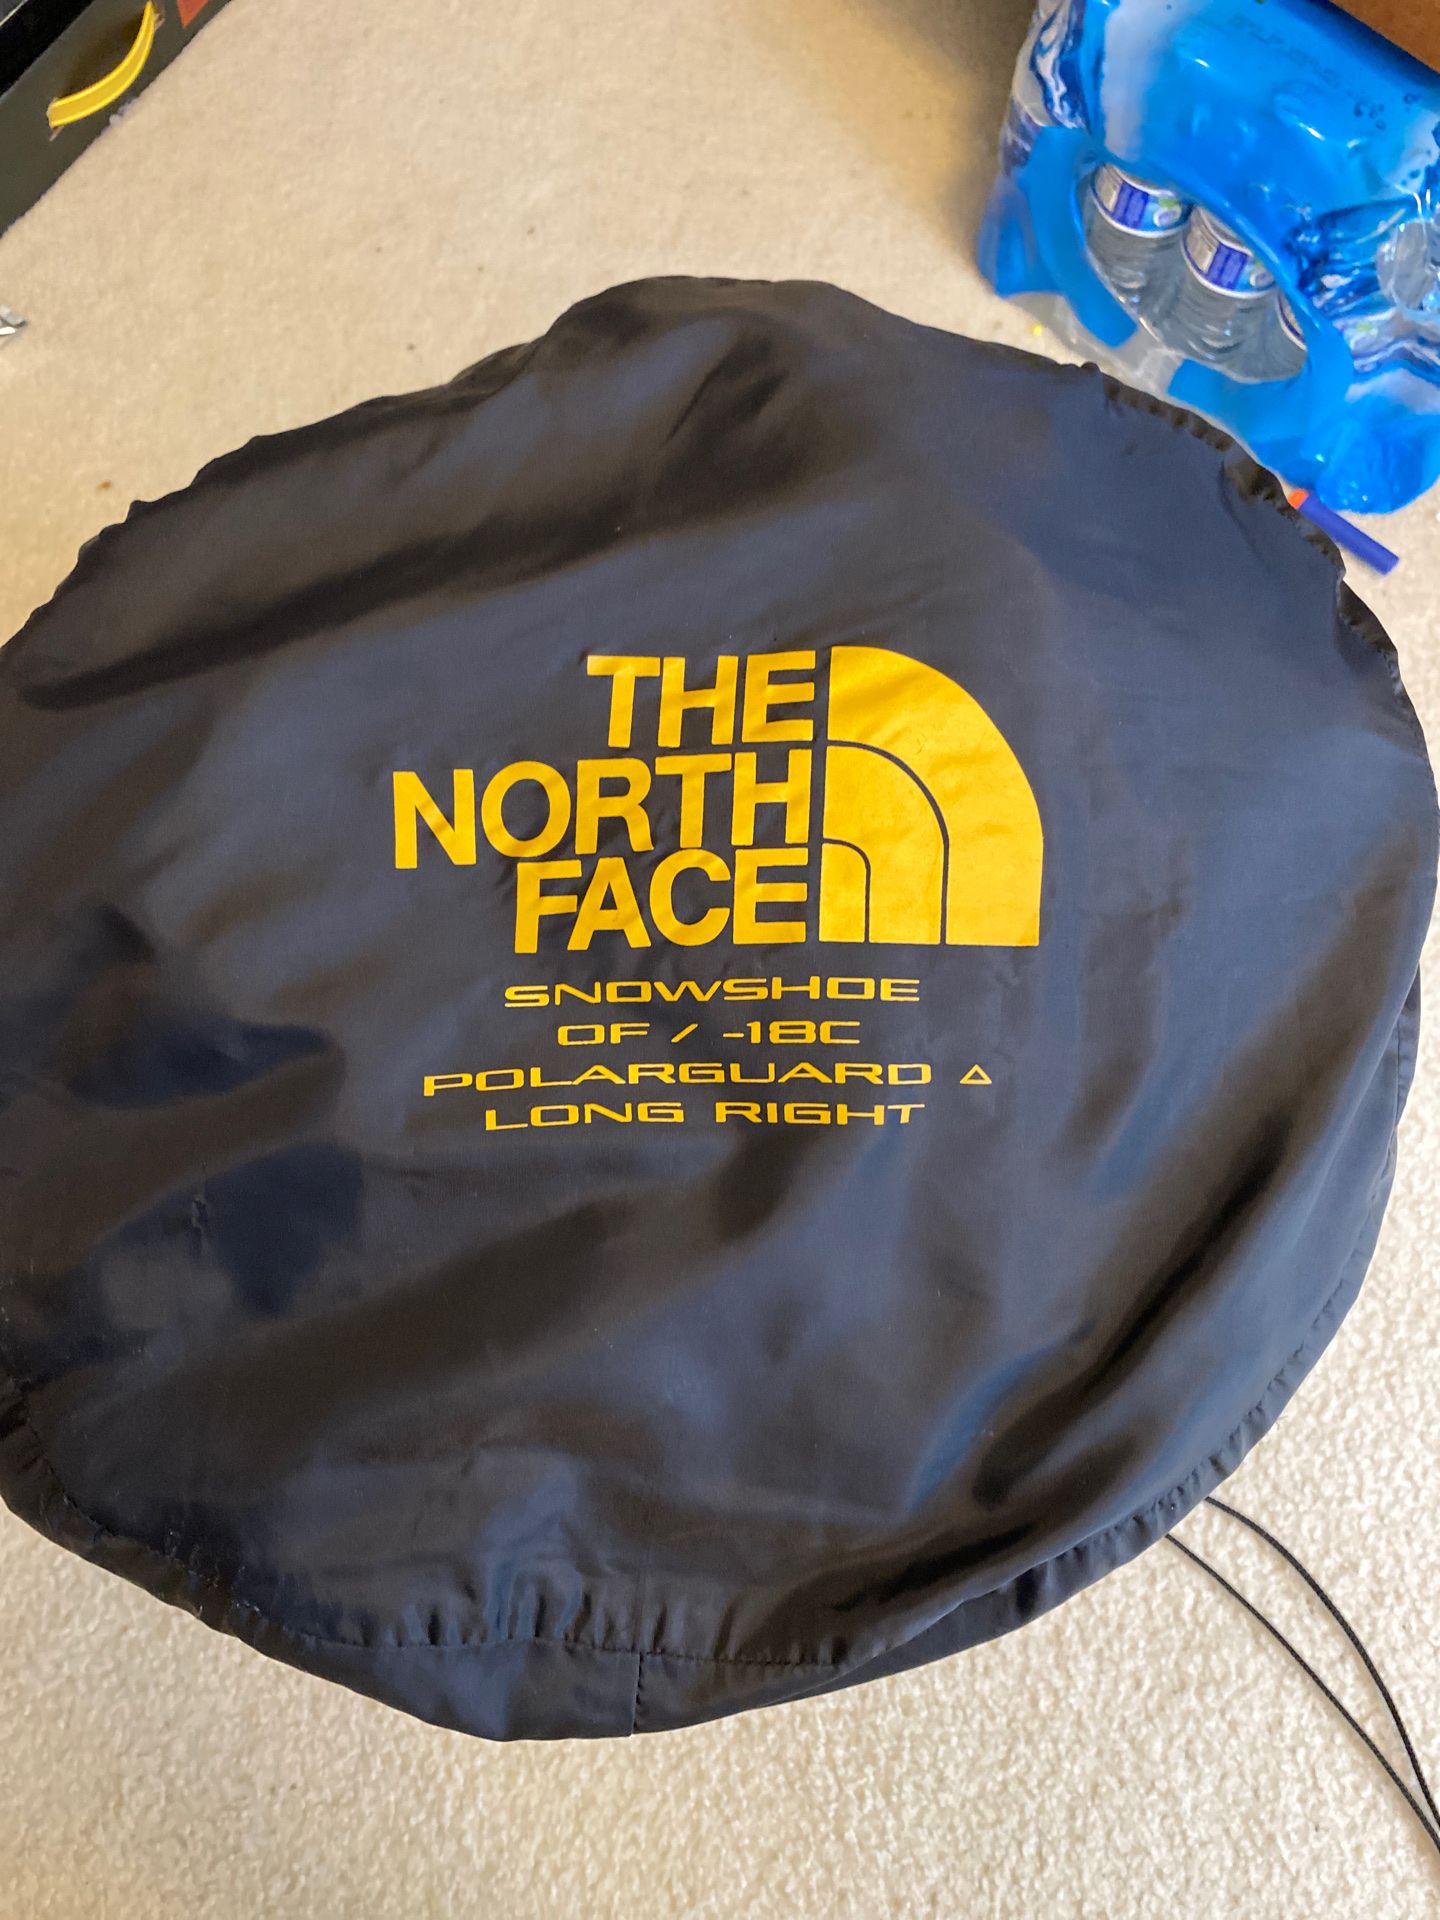 The North Face 0 degree sleeping bag